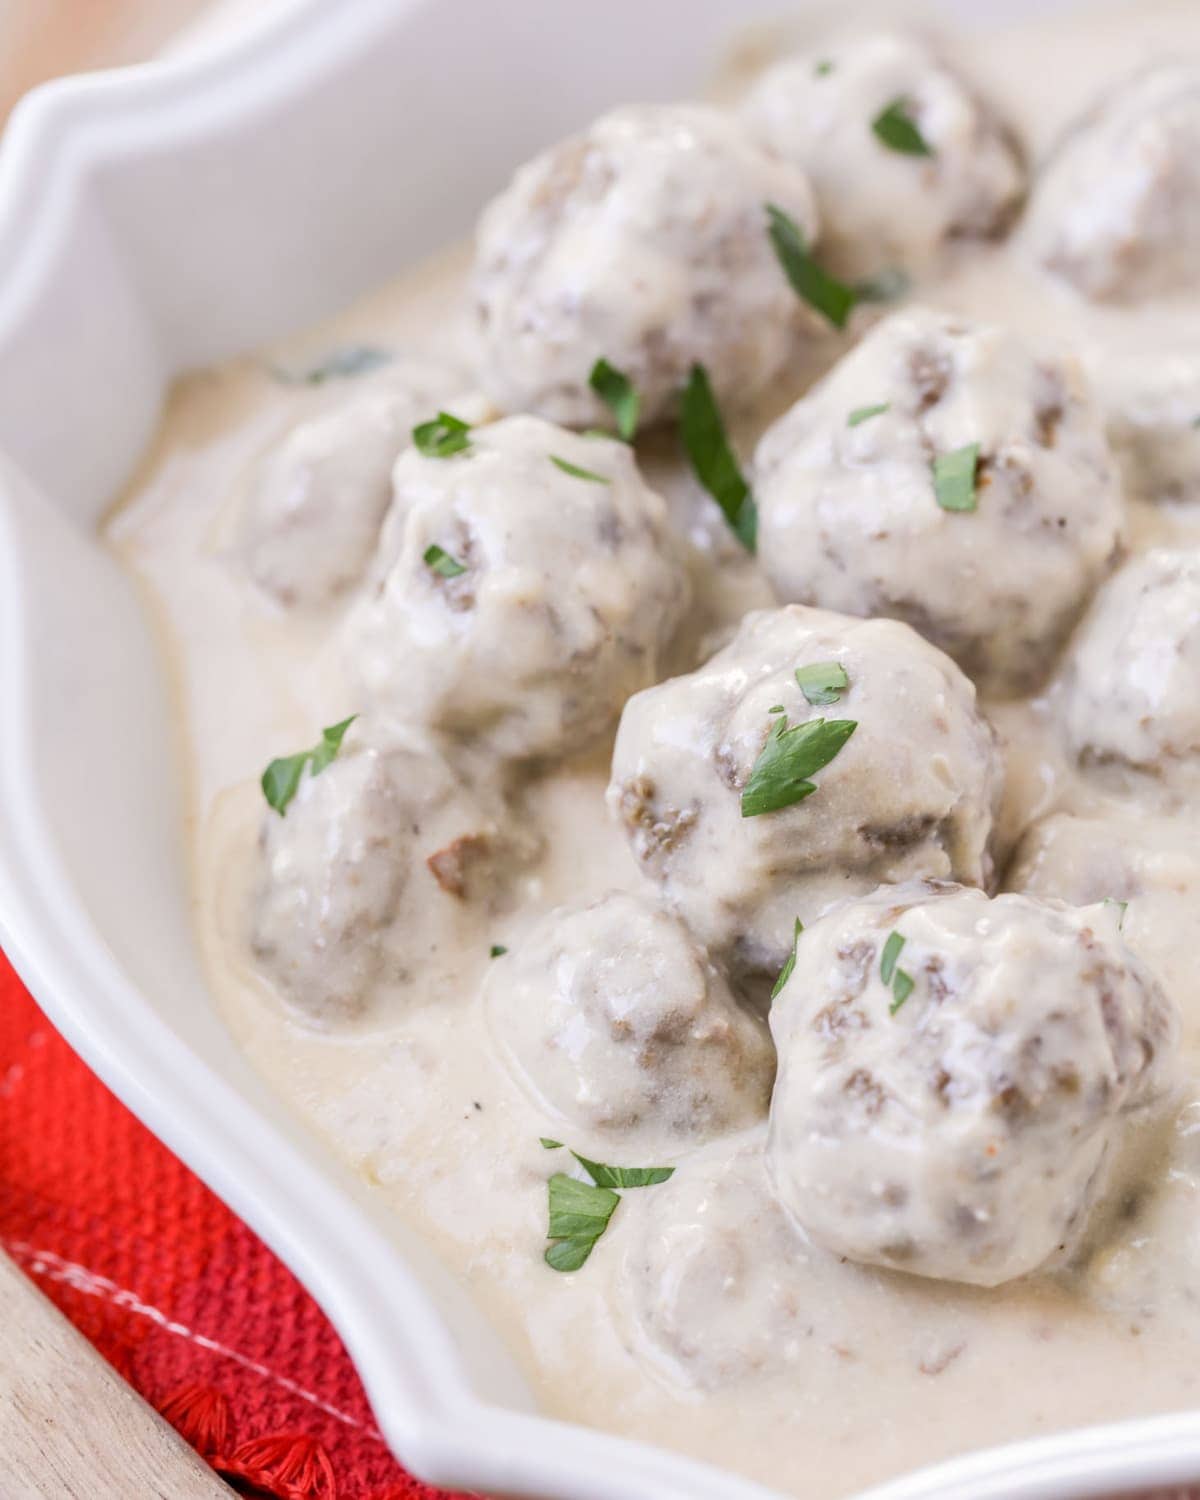 easy swedish meatballs topped with parsley